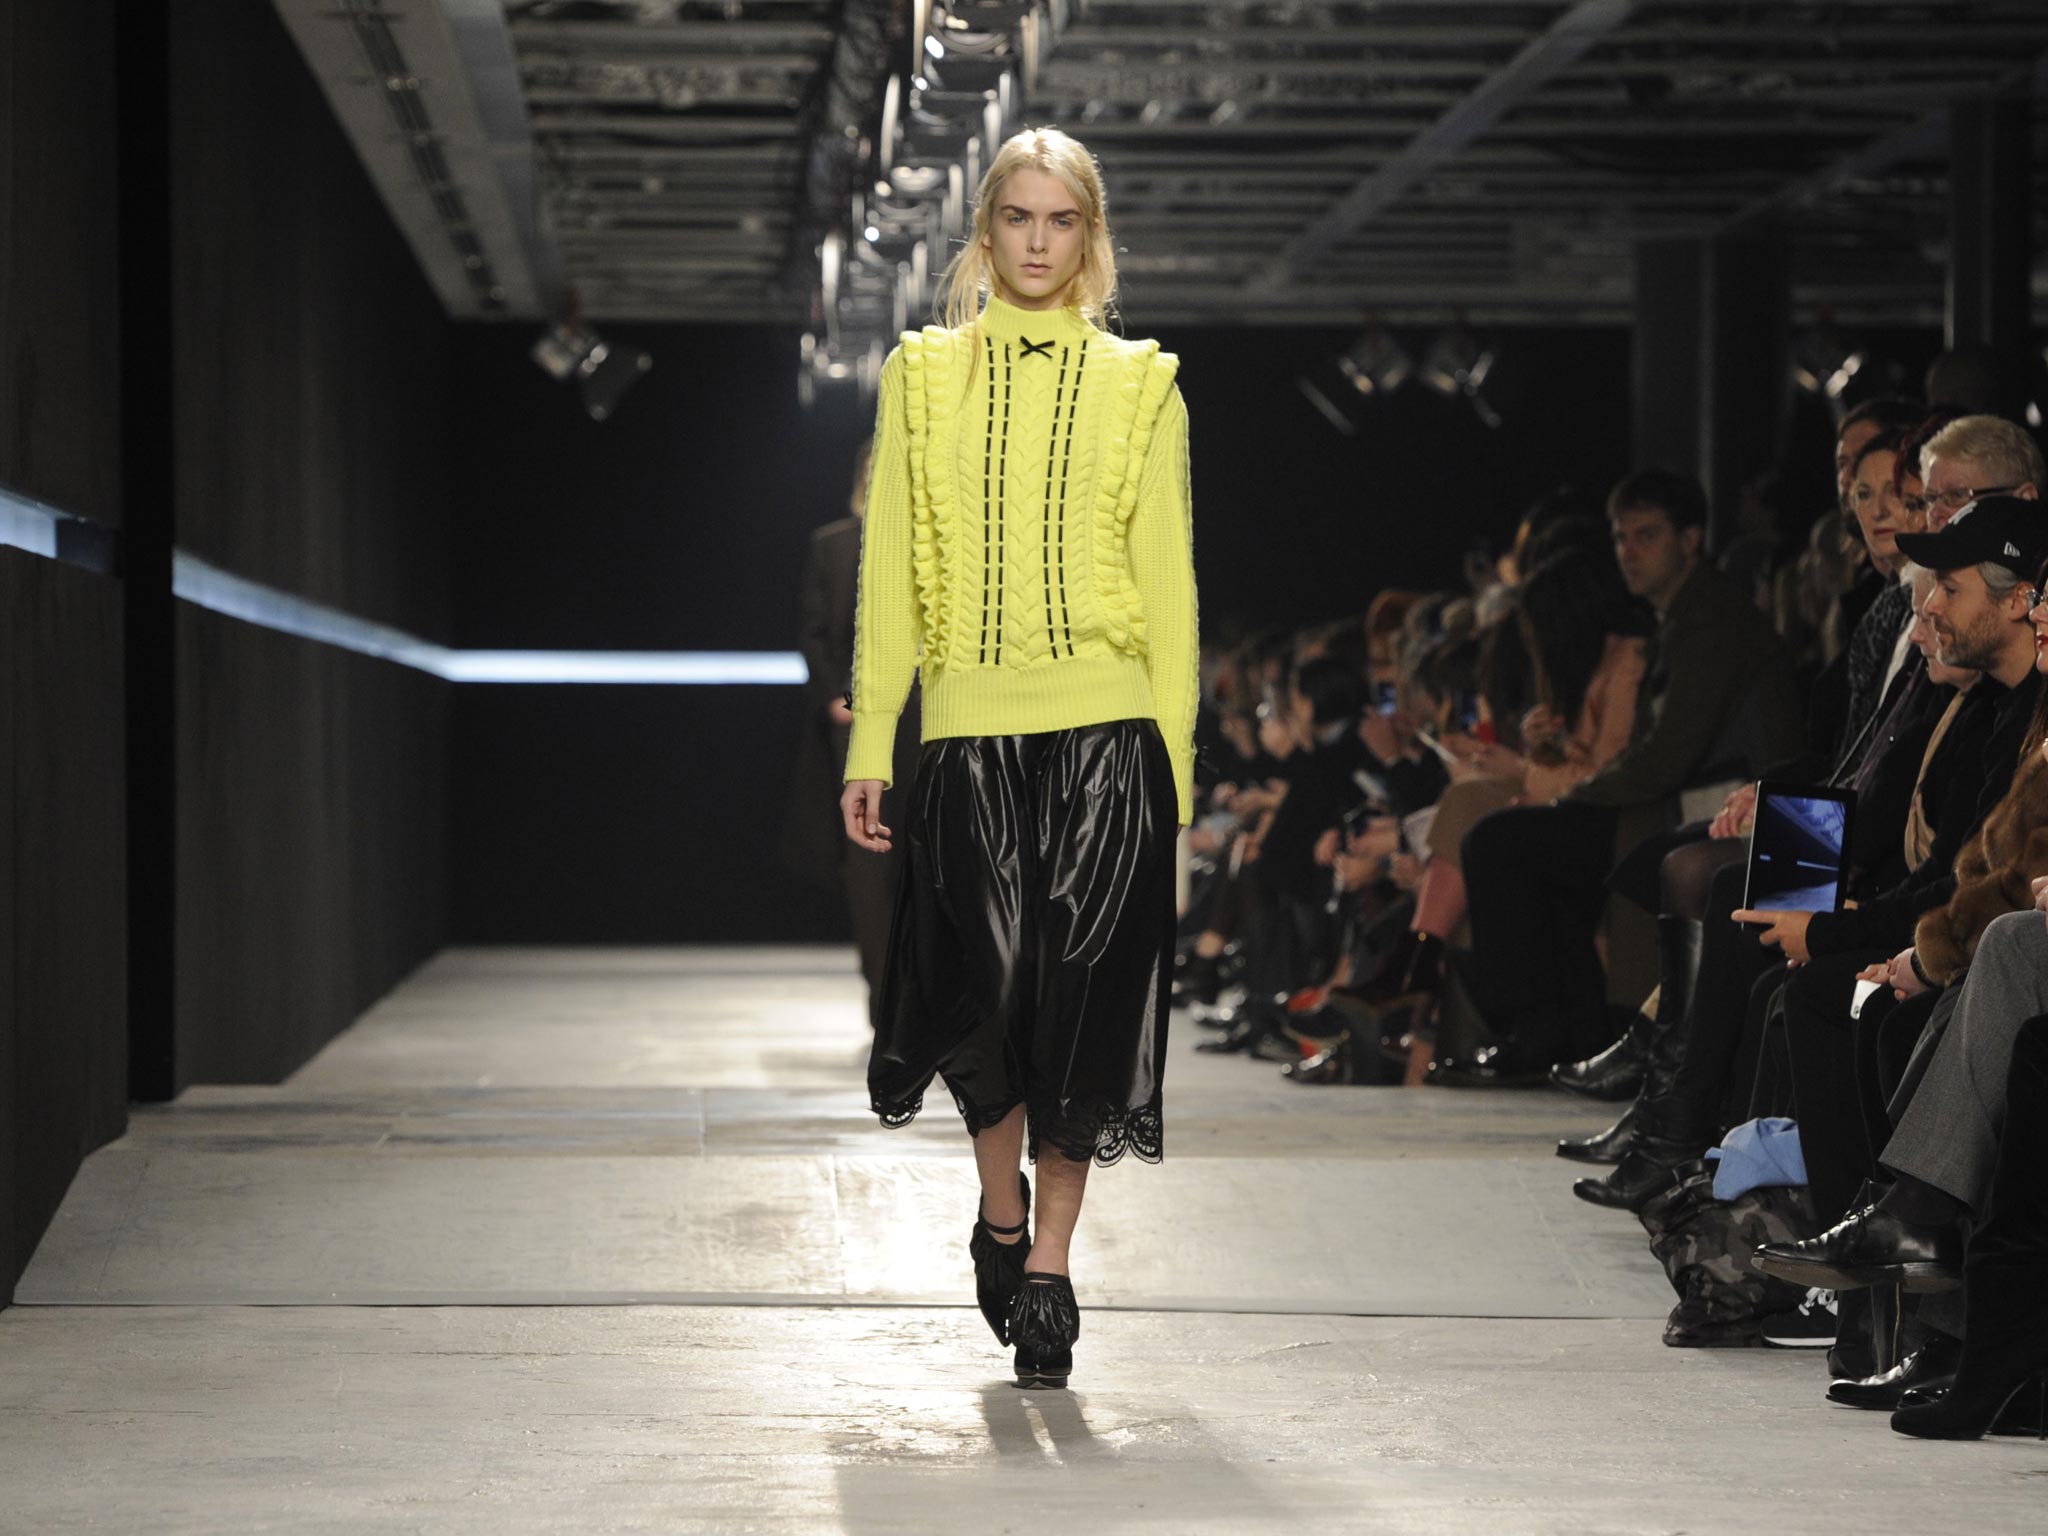 Christopher Kane’s latest collection embraced neon colours